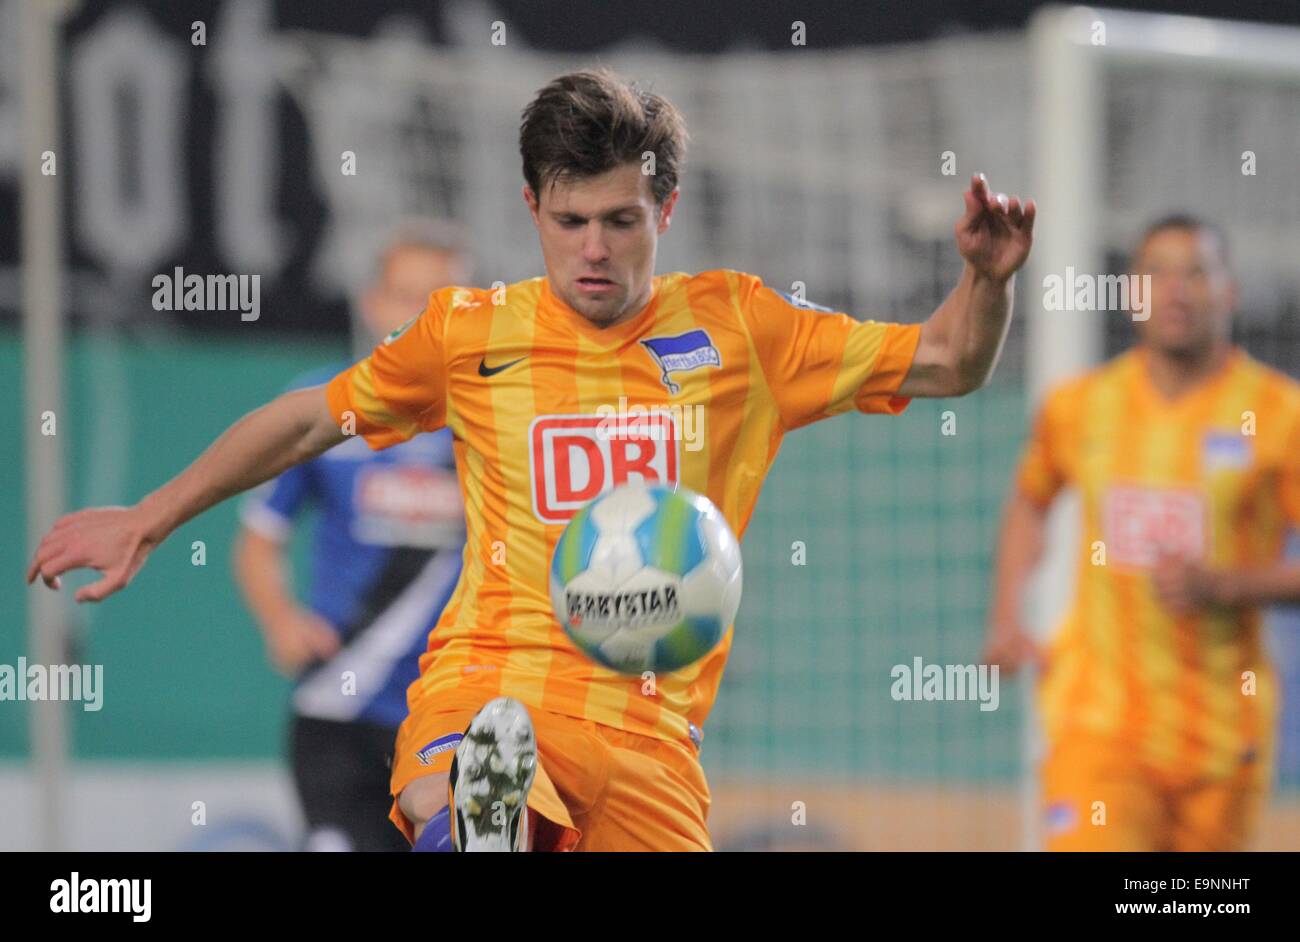 Bielefeld, Germany. 28th Oct, 2014. Berlin's Valentin Stocker in action during the DFB second round match between Arminia Bielefeld and Hertha BSC in Schueco Arena in Bielefeld, Germany, 28 October 2014. Photo: OLIVER KRATO/dpa/Alamy Live News Stock Photo